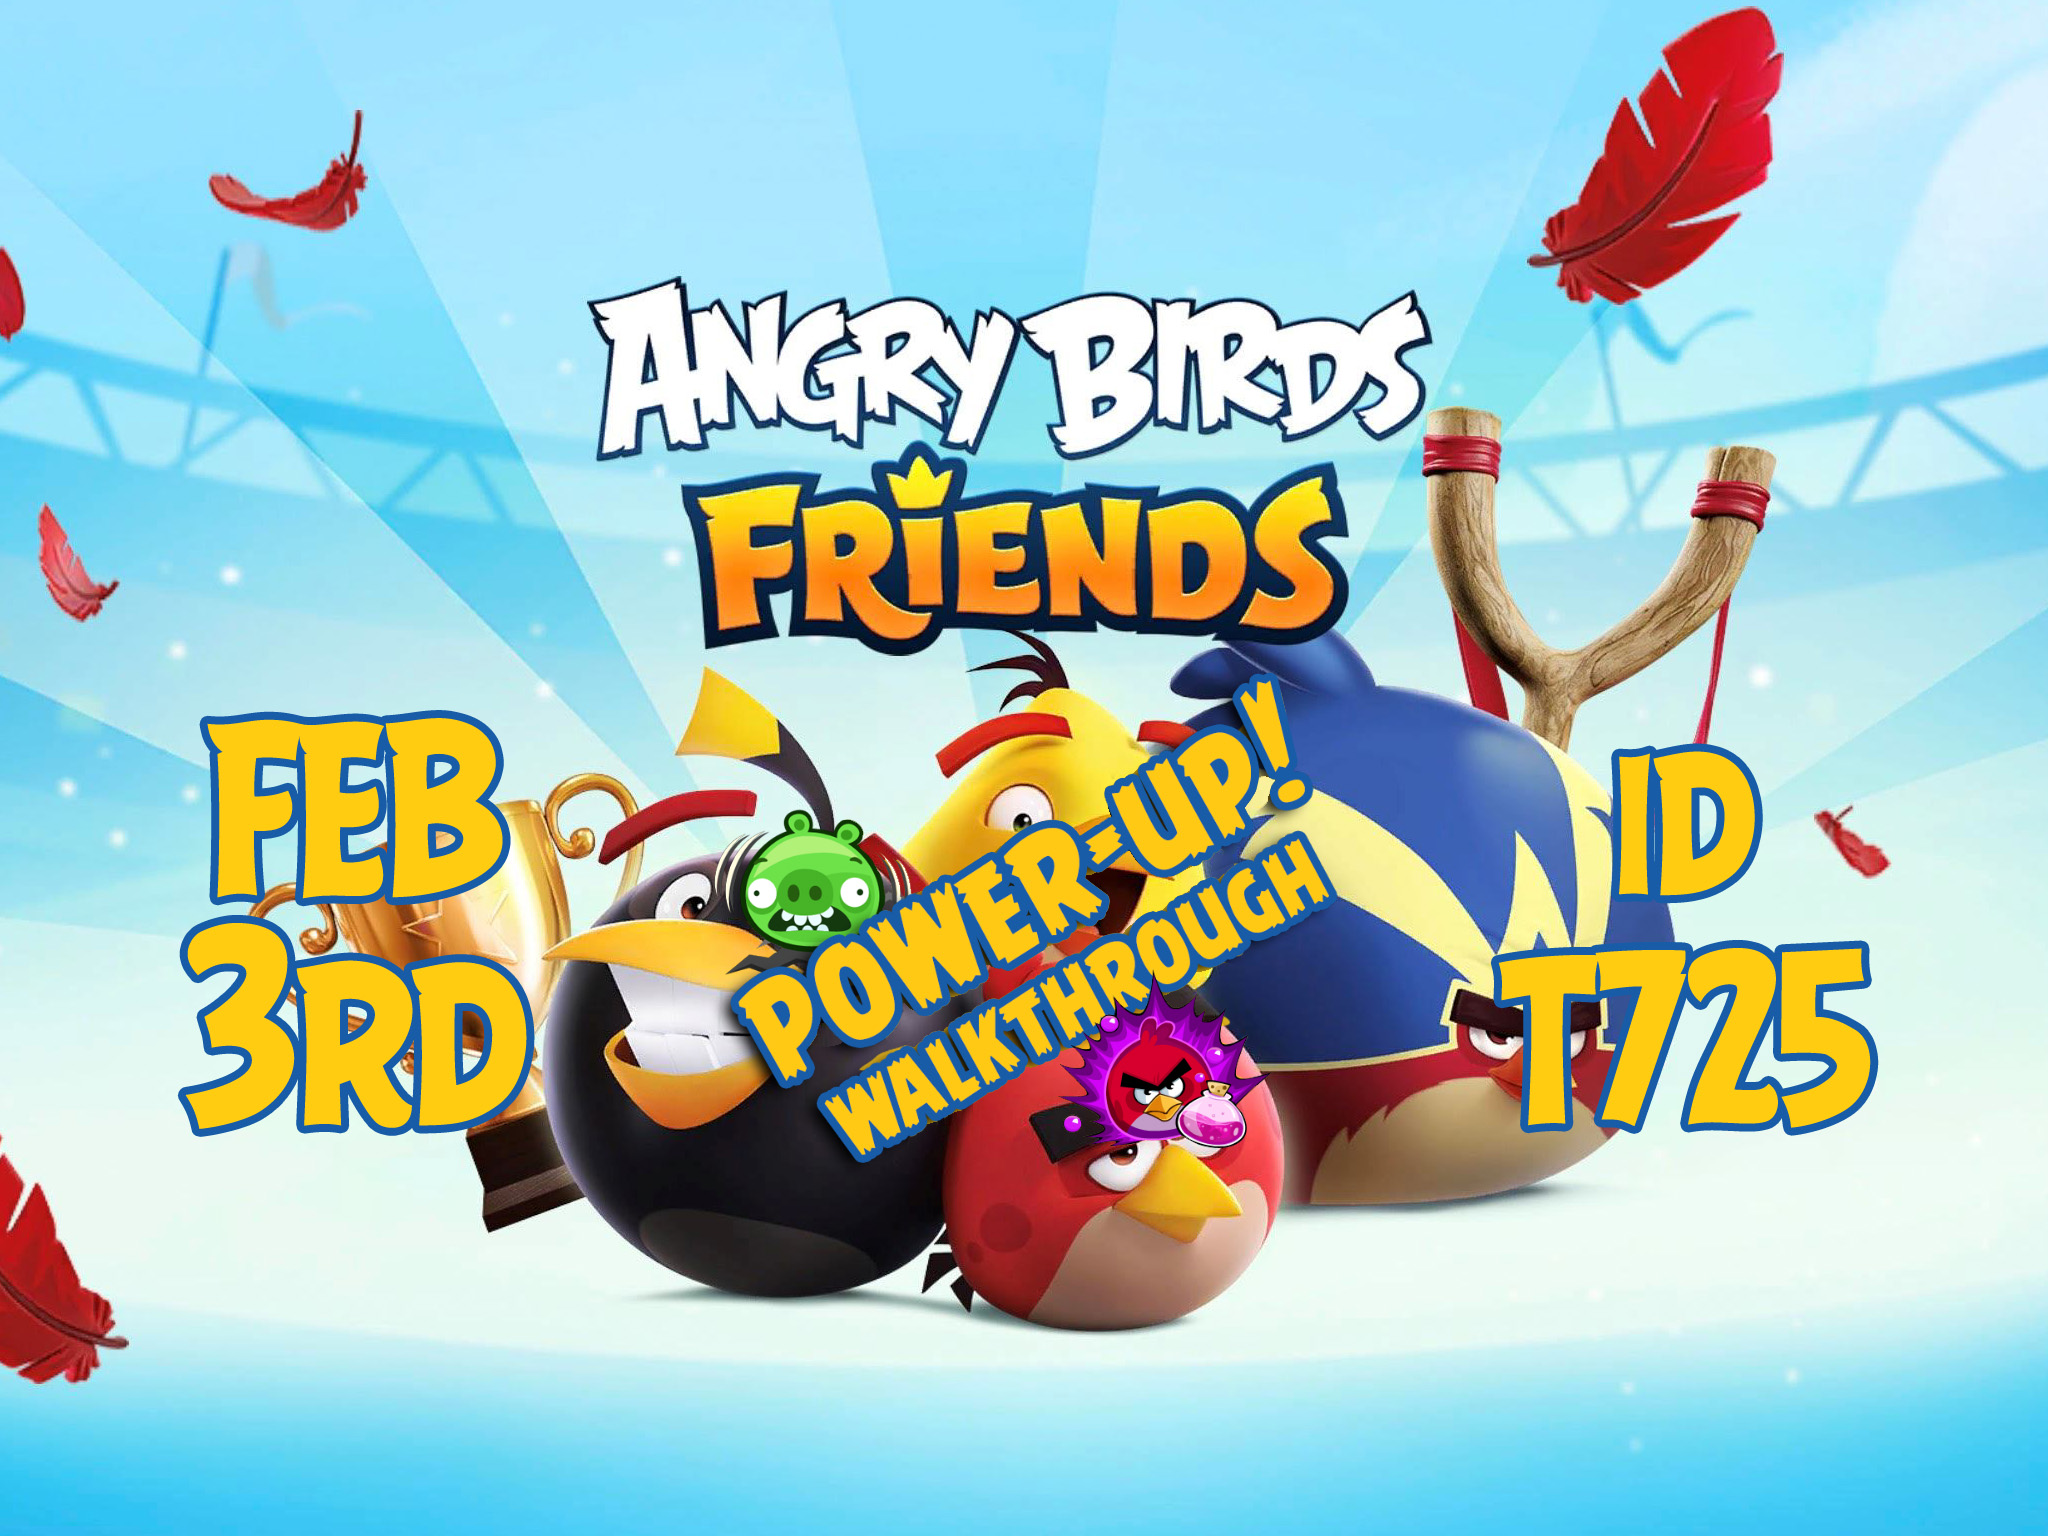 Angry-Birds-Friends-Tournament-T725-Feature-Image-PU